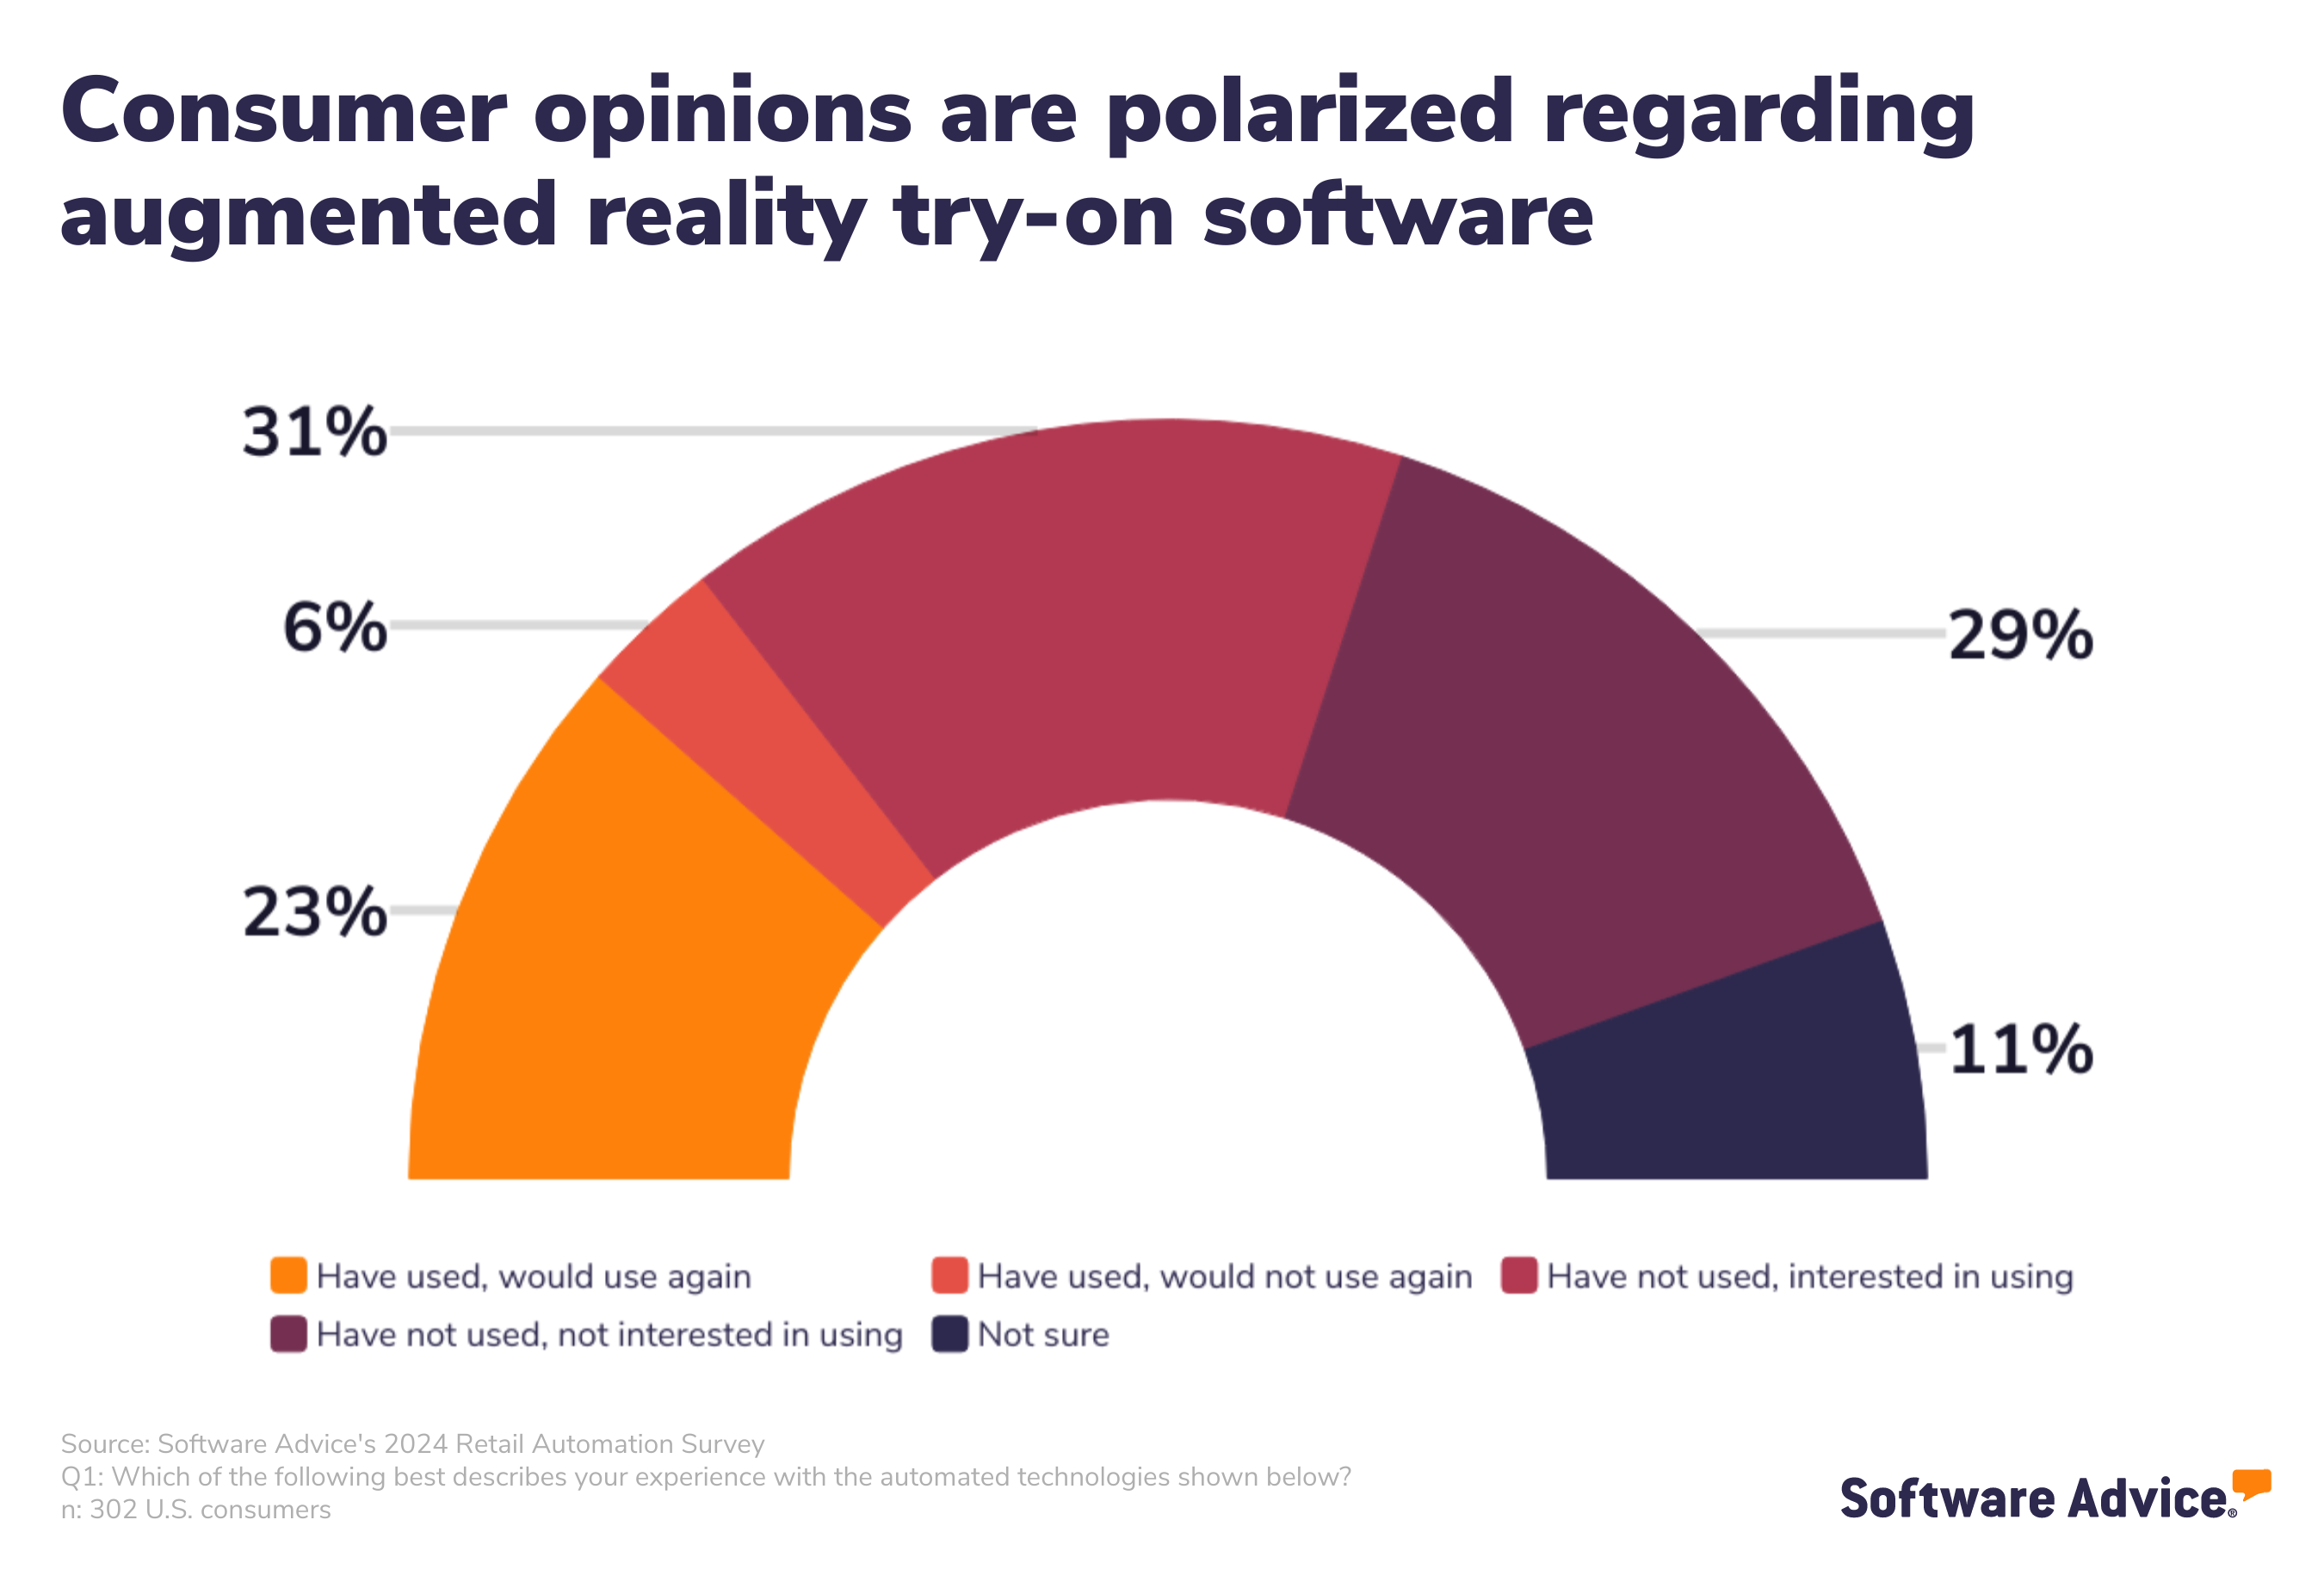 SA graphic depicting the percentages of consumer opinions who are polarized regarding augmented reality try-on software